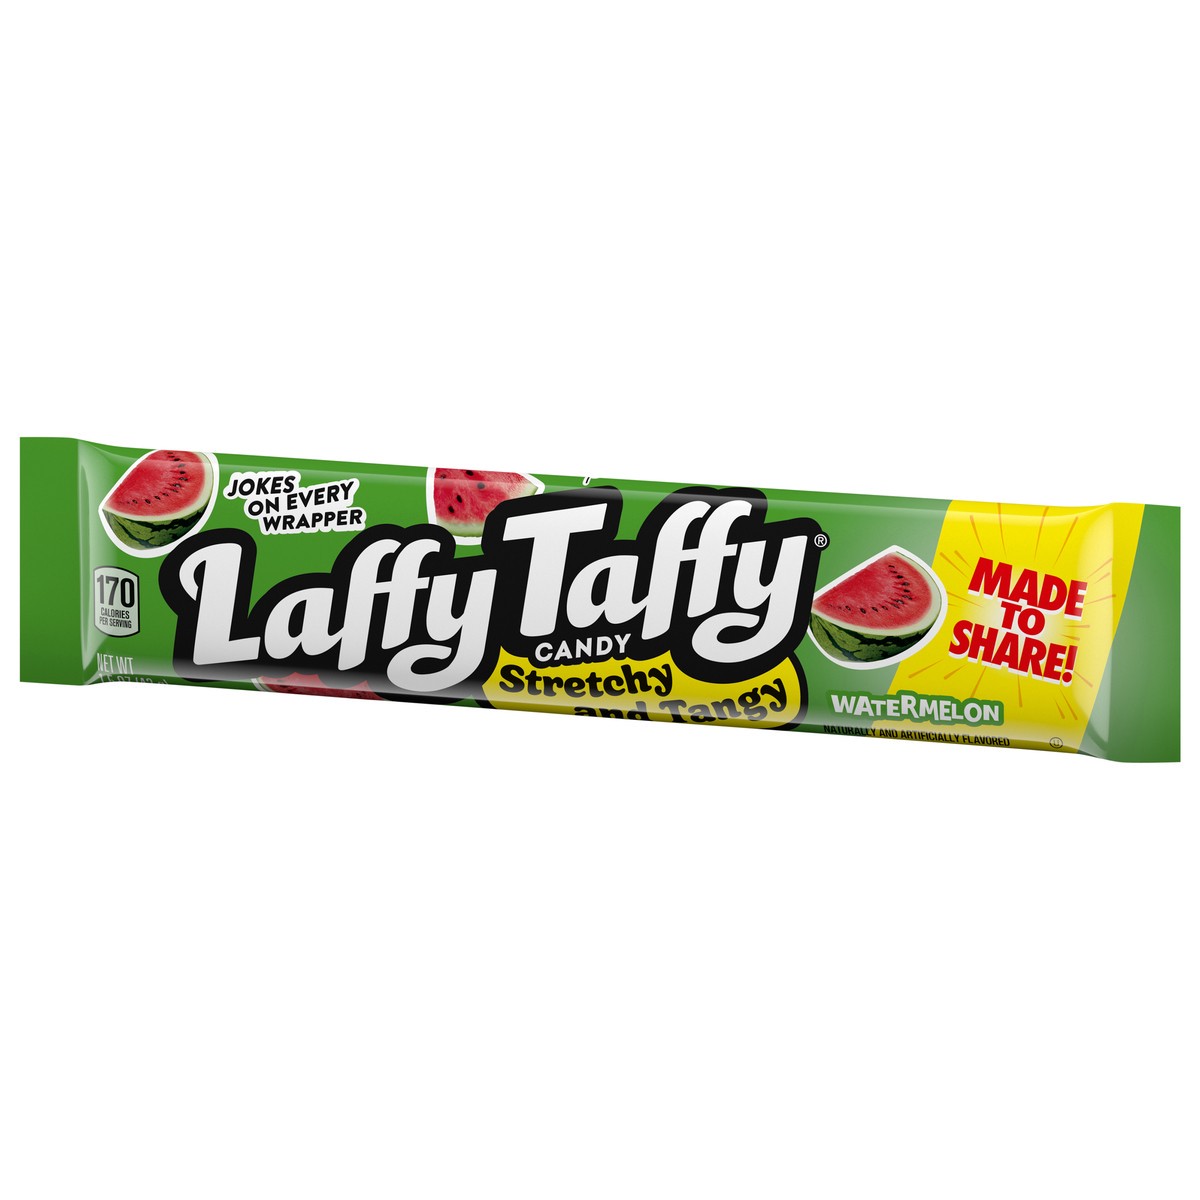 slide 12 of 13, Laffy Taffy Stretchy and Tangy Watermelon 71439 158370 1.5 oz, 1.5 oz